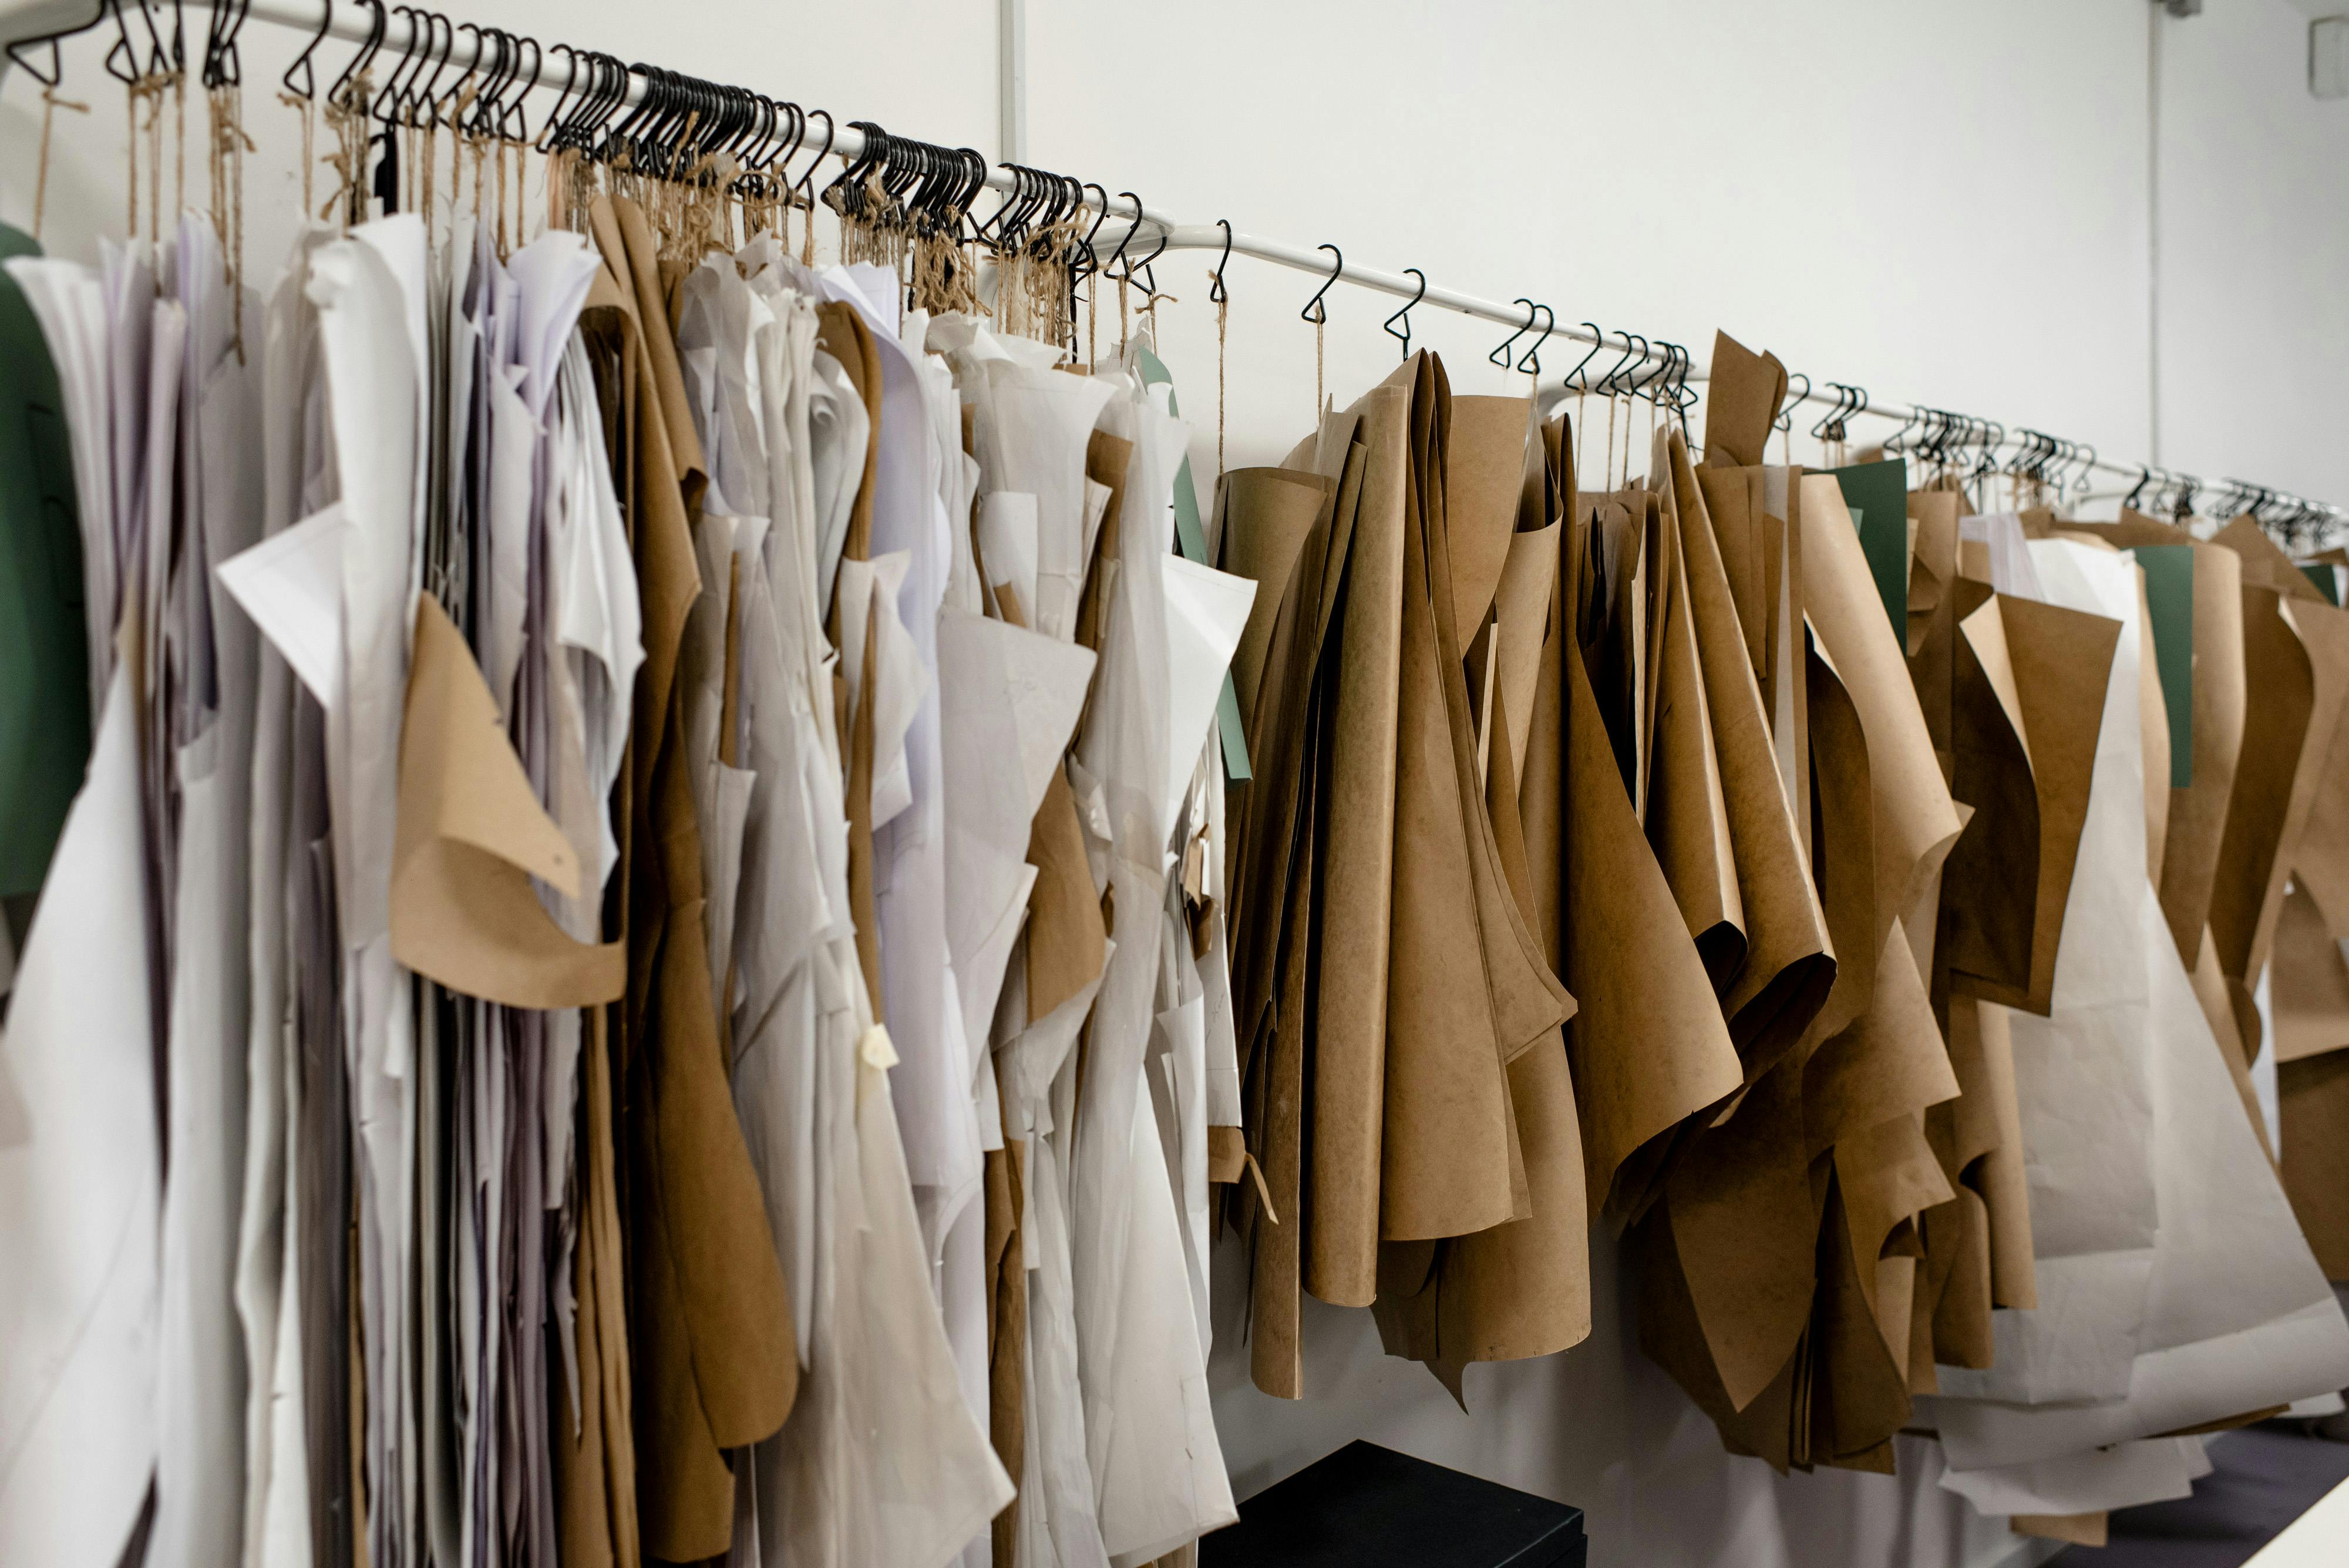 Assorted sewing patterns on hangers inside tailor atelier \u00b7 Free Stock Photo